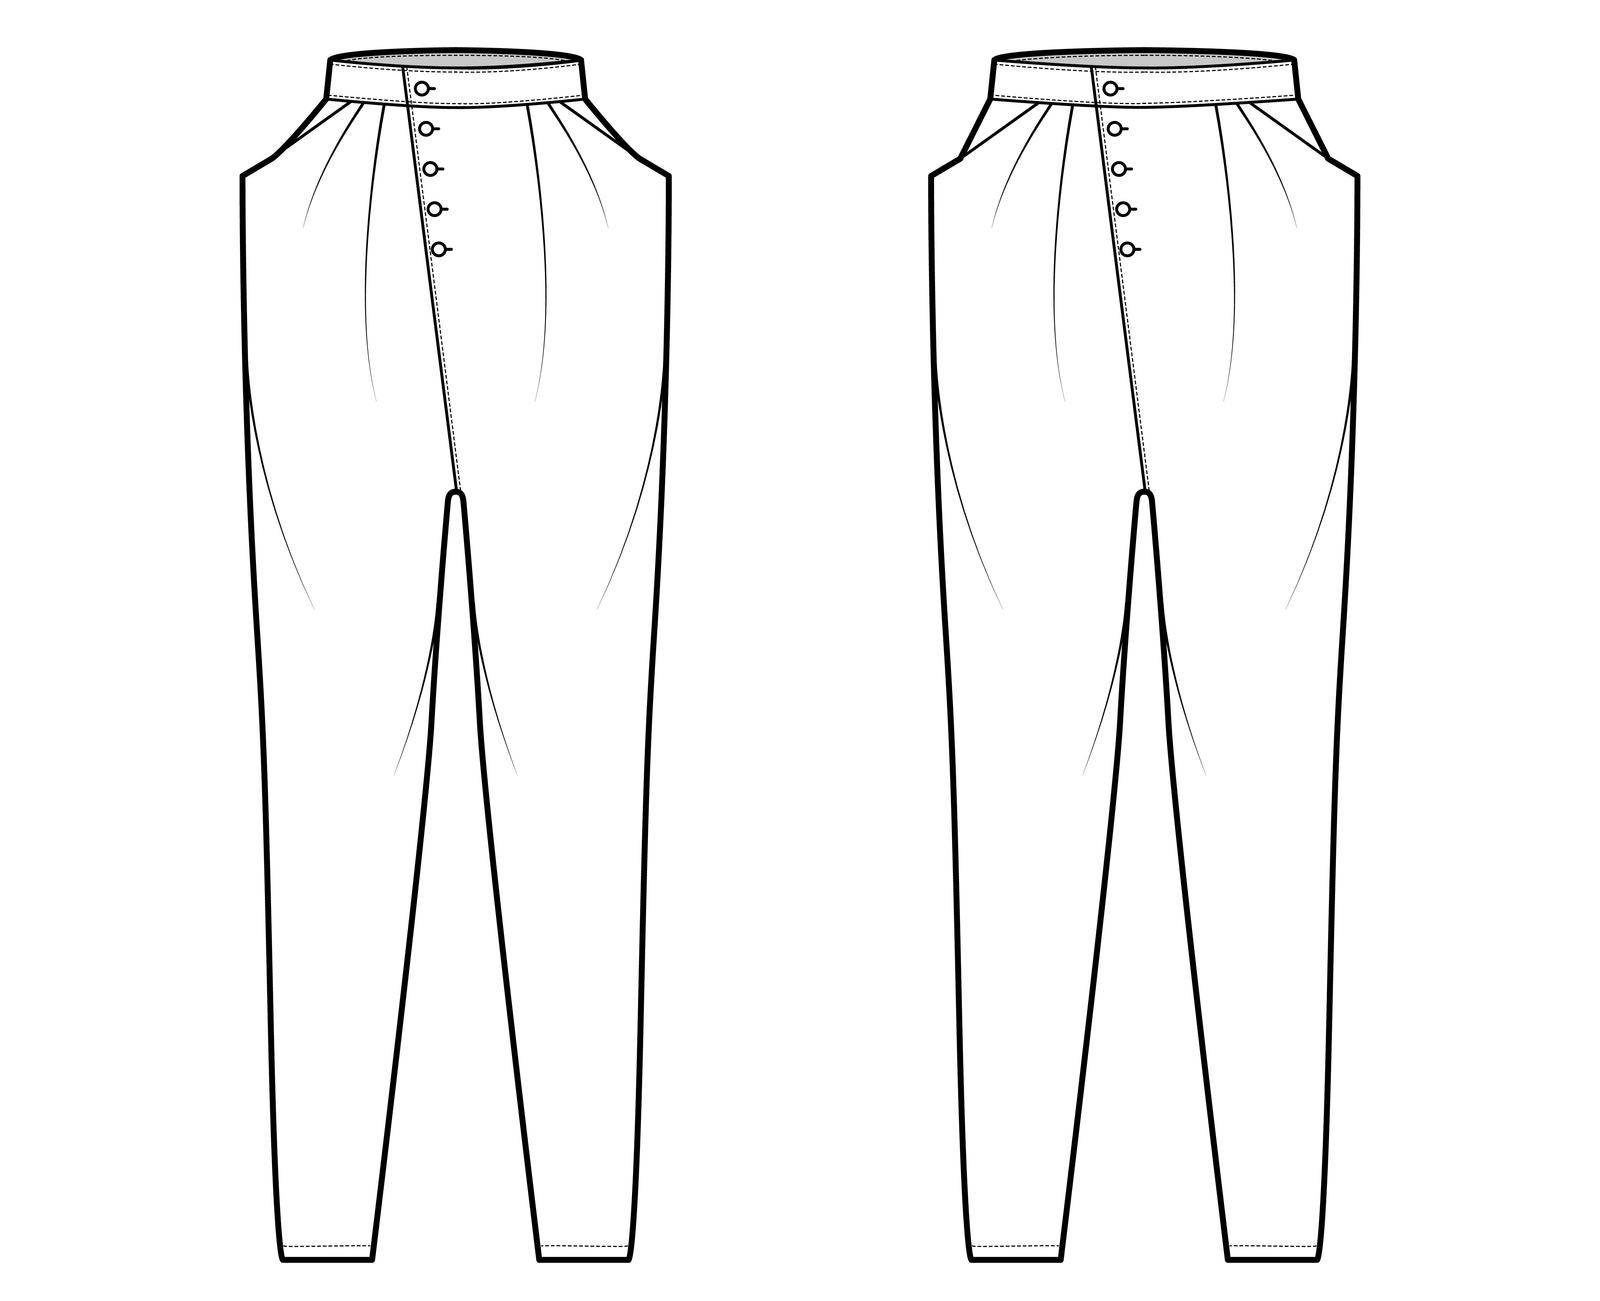 Set of Tapered Baggy pants technical fashion illustration with low normal waist, high rise, slash pockets, draping front by Vectoressa